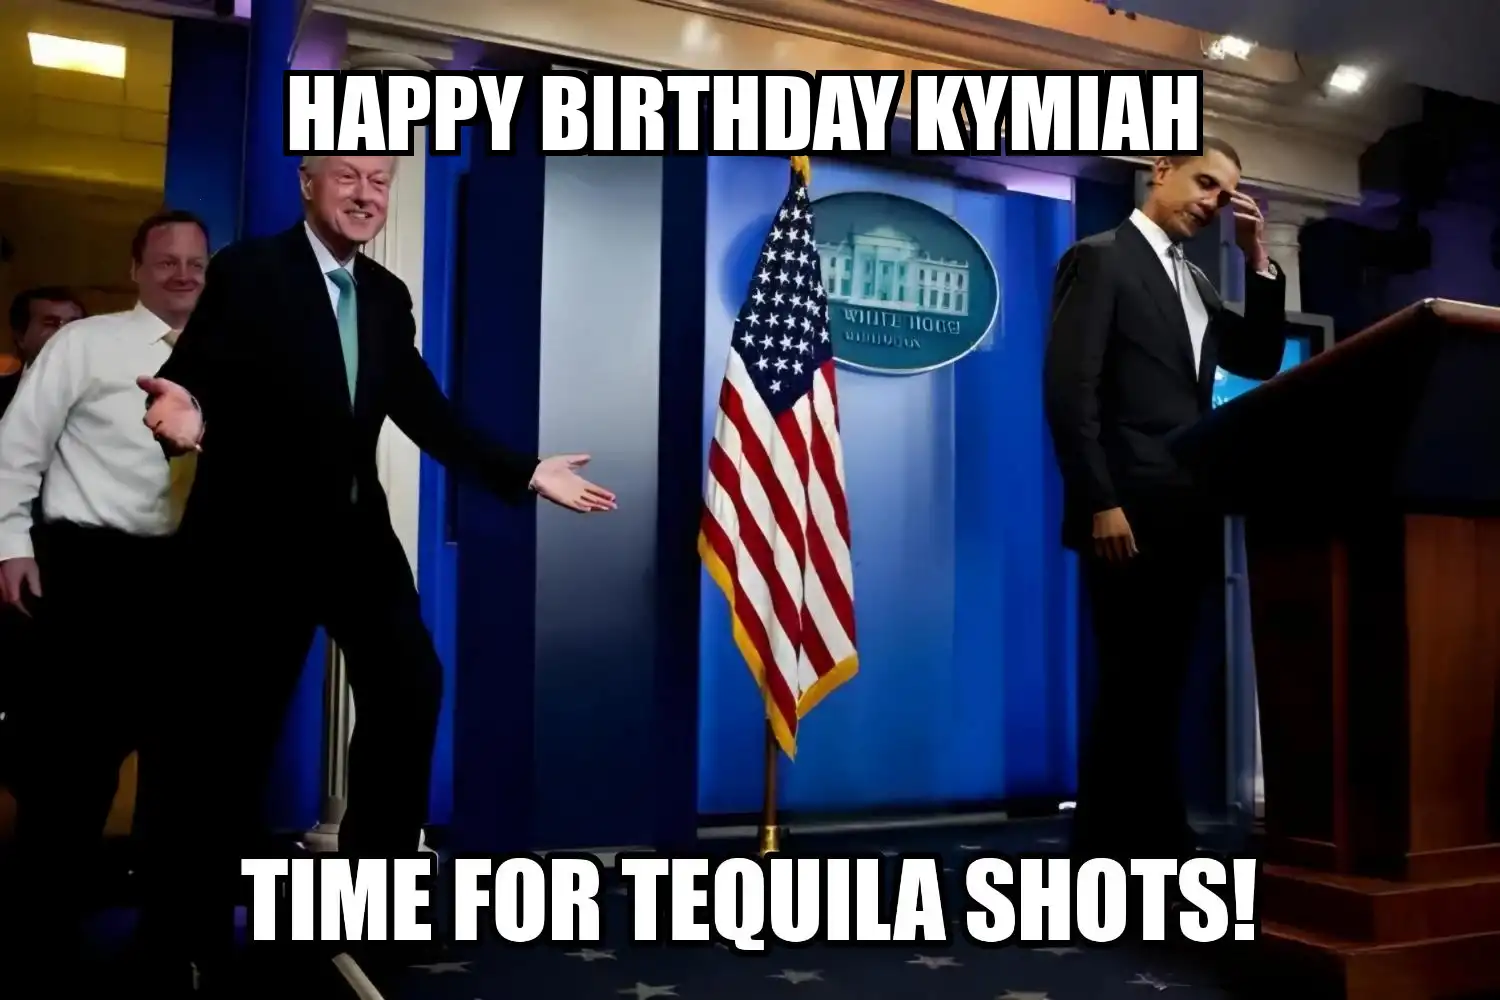 Happy Birthday Kymiah Time For Tequila Shots Memes